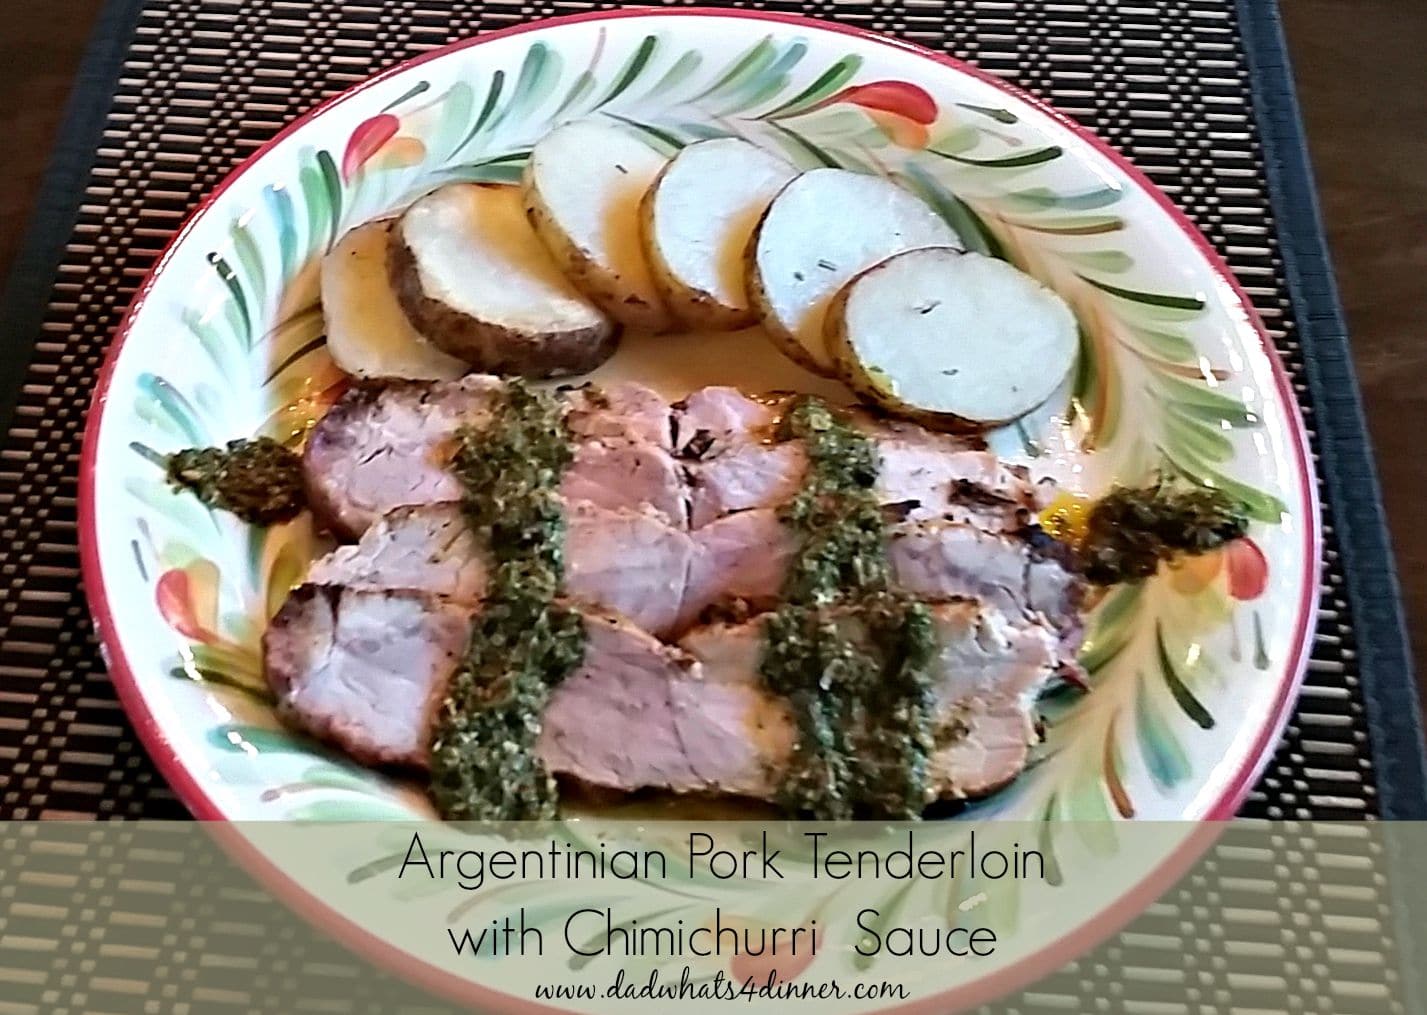 Super easy Grilled Argentinian Pork Tenderloin served with chimichurri sauce is bursting with fresh flavors!